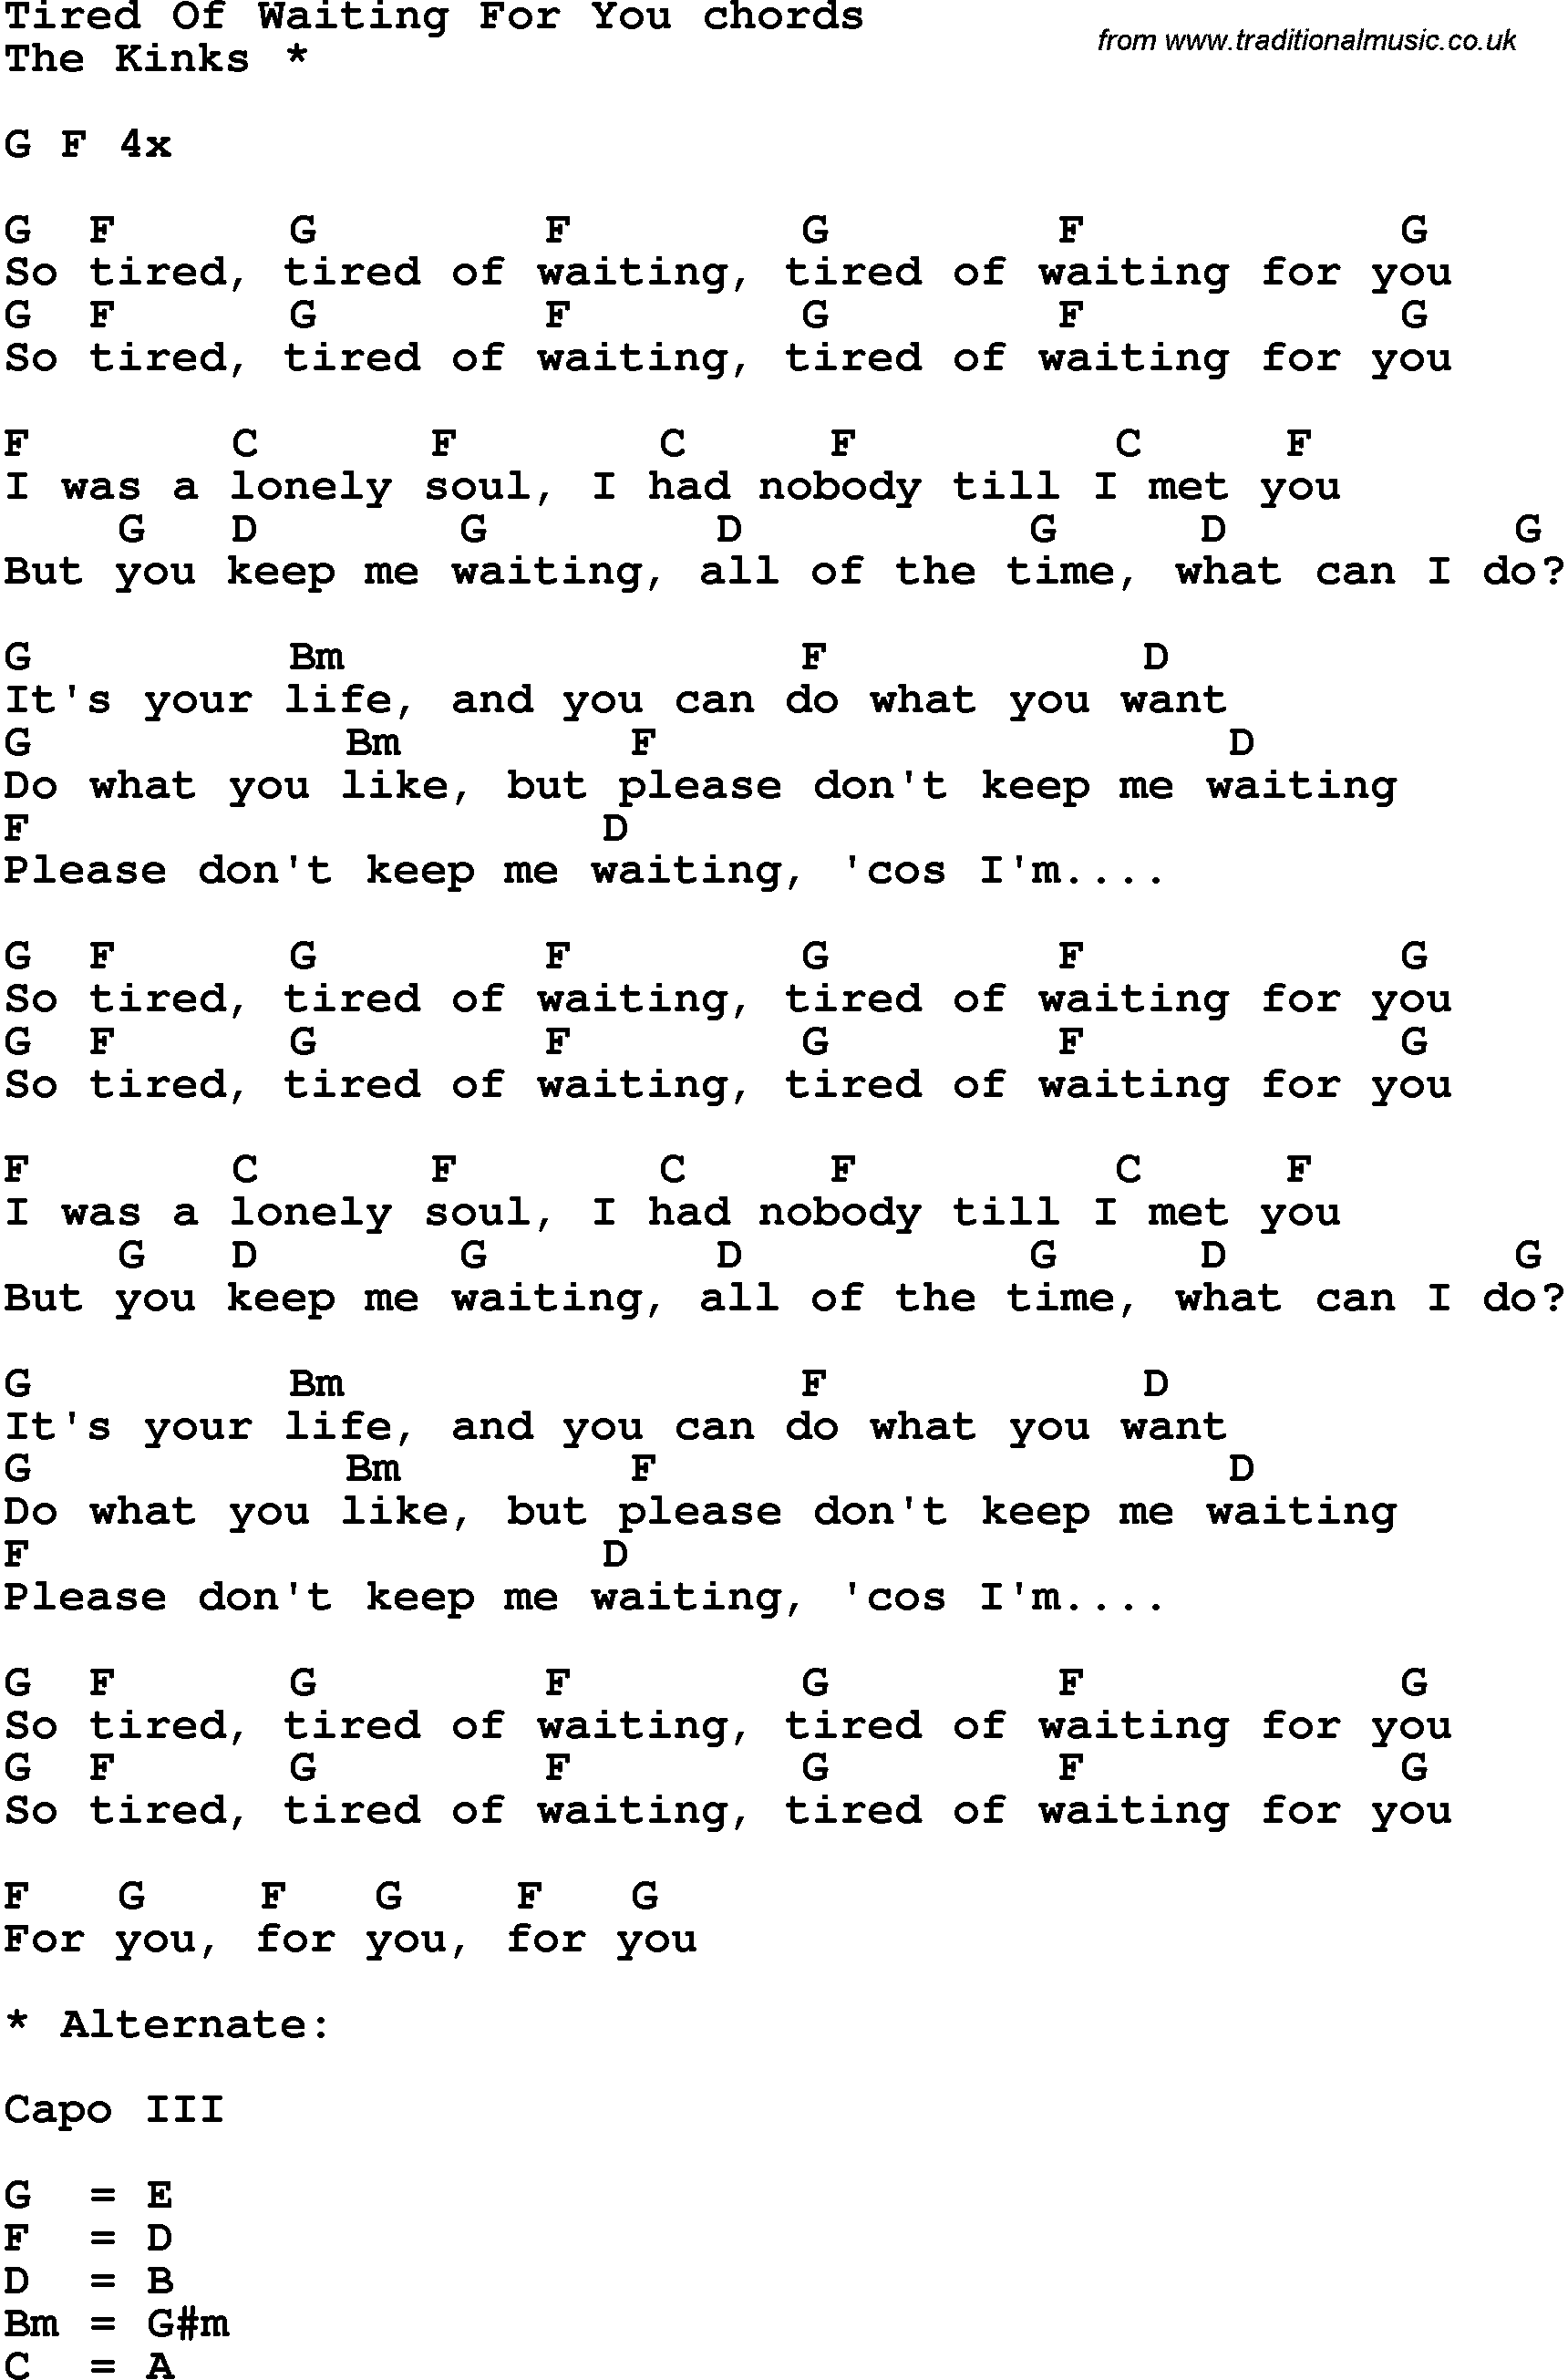 Song Lyrics with guitar chords for Tired Of Waiting For You